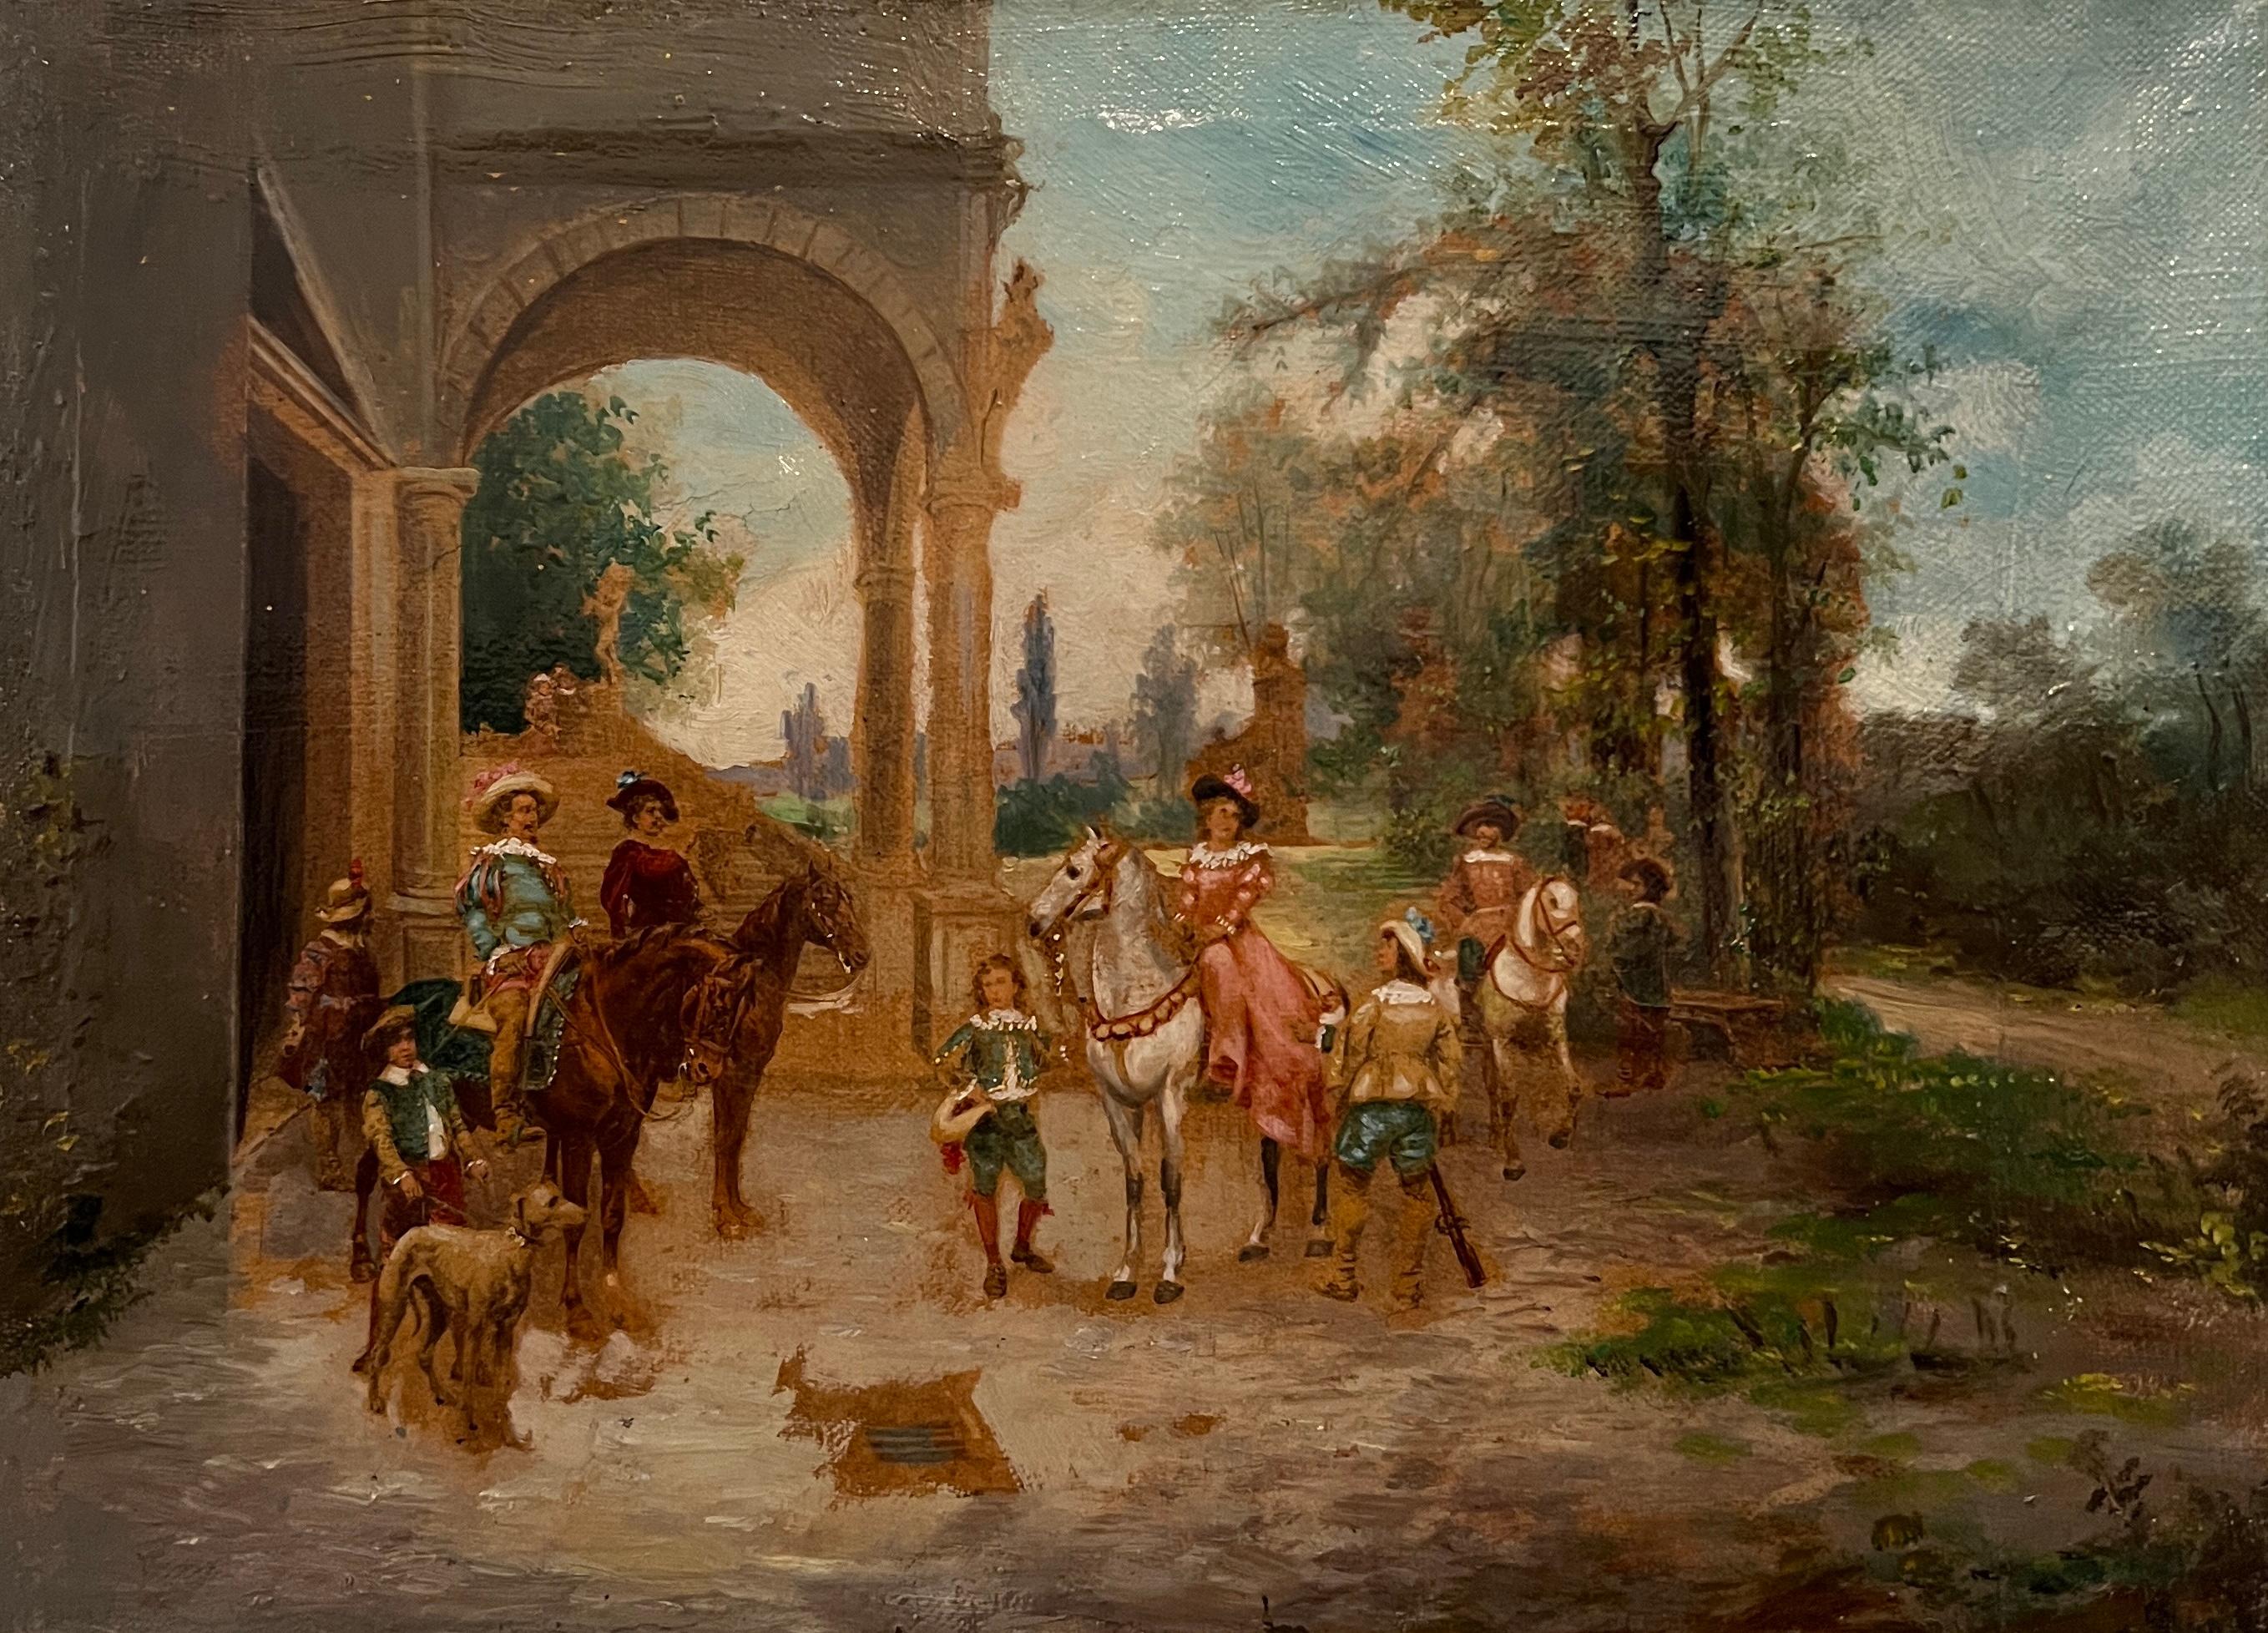 Unknown Landscape Painting - Landscape with riders and figures